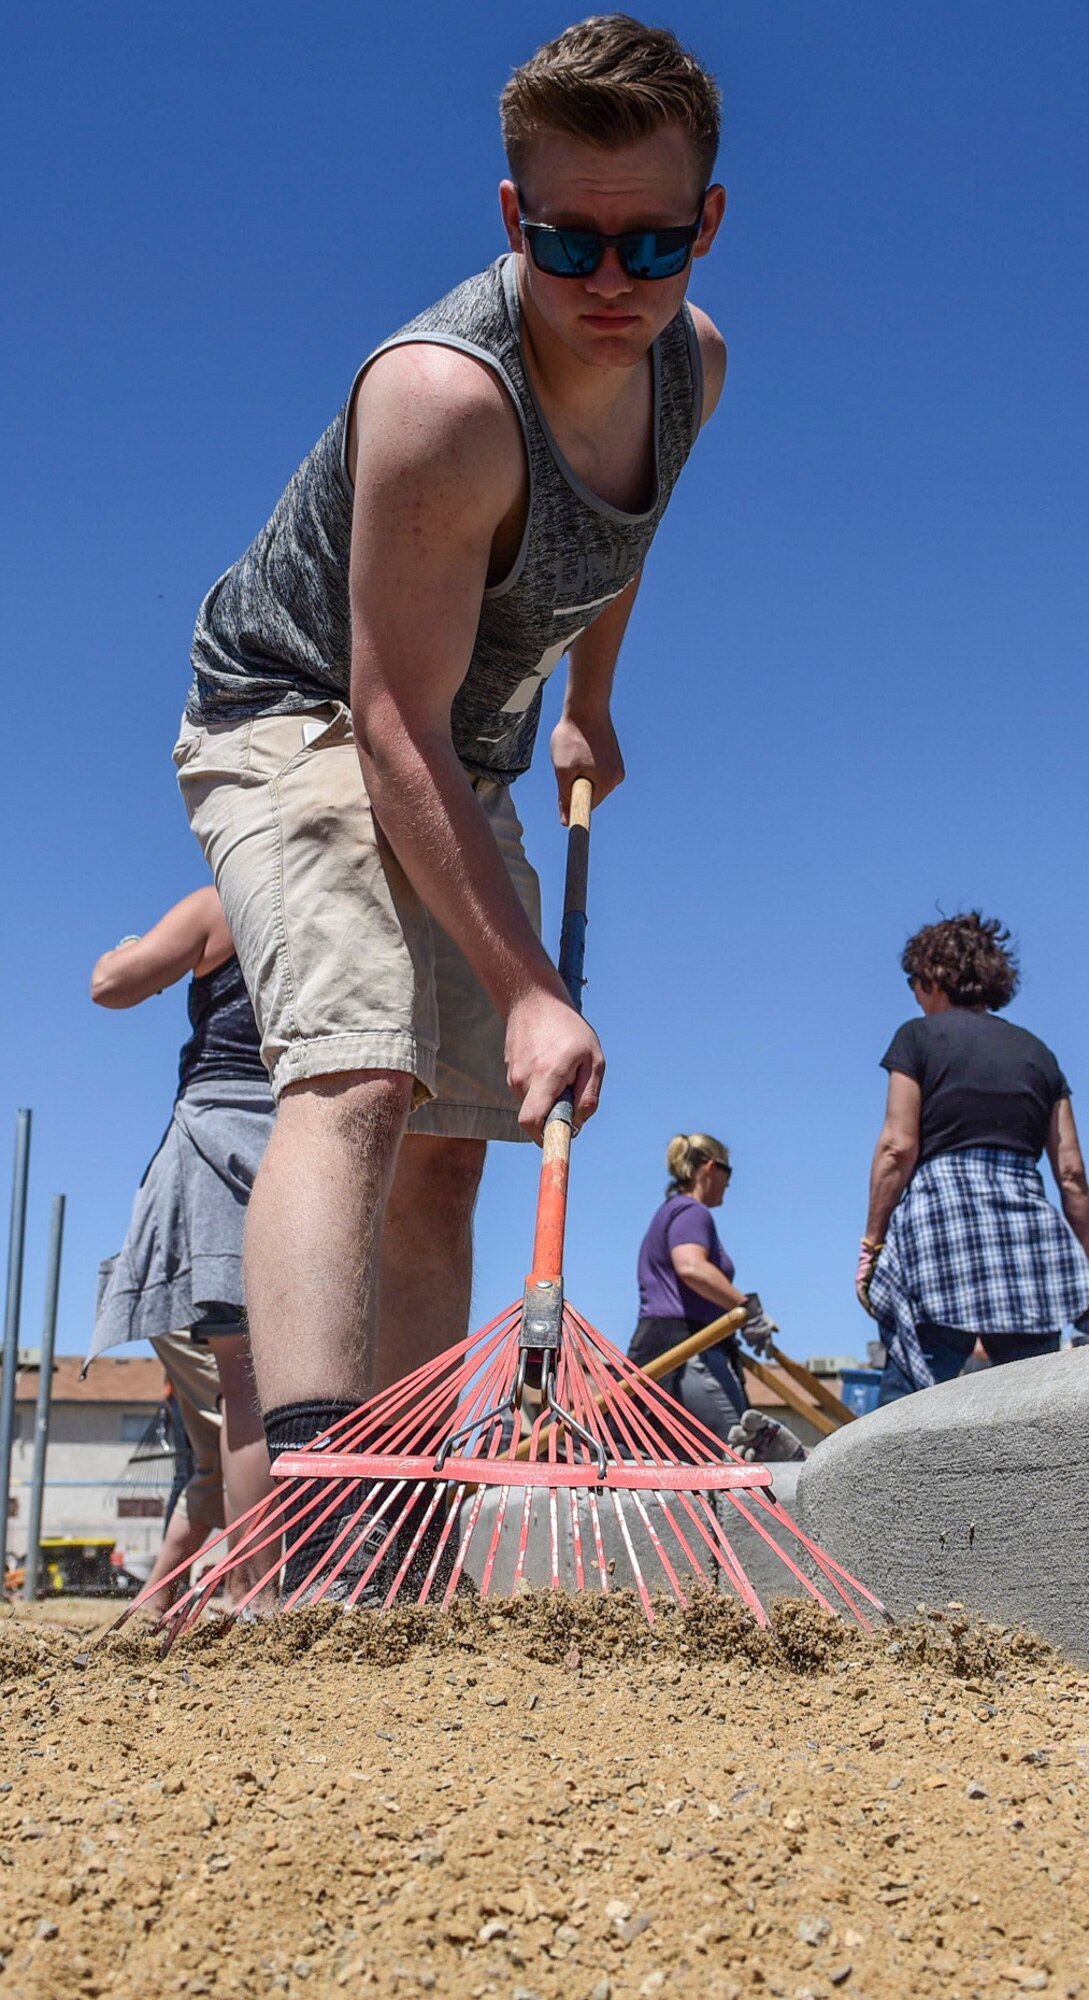 Airman Logan Gaines, 99th Medical Group mental health technician, rakes dirt around a newly built garden between J.E. Manch and Zel & Mary elementary schools, May 12, 2017. Students at the elementary schools will be able to grow fruits and vegetables as part of their outdoor curriculum. Anyone can purchase the fruits and vegetables from the garden and the money collected goes back to the school for seeds, fertilizer and other outdoor projects. (U.S. Air Force photo by Airman 1st Class Andrew D. Sarver/Released)